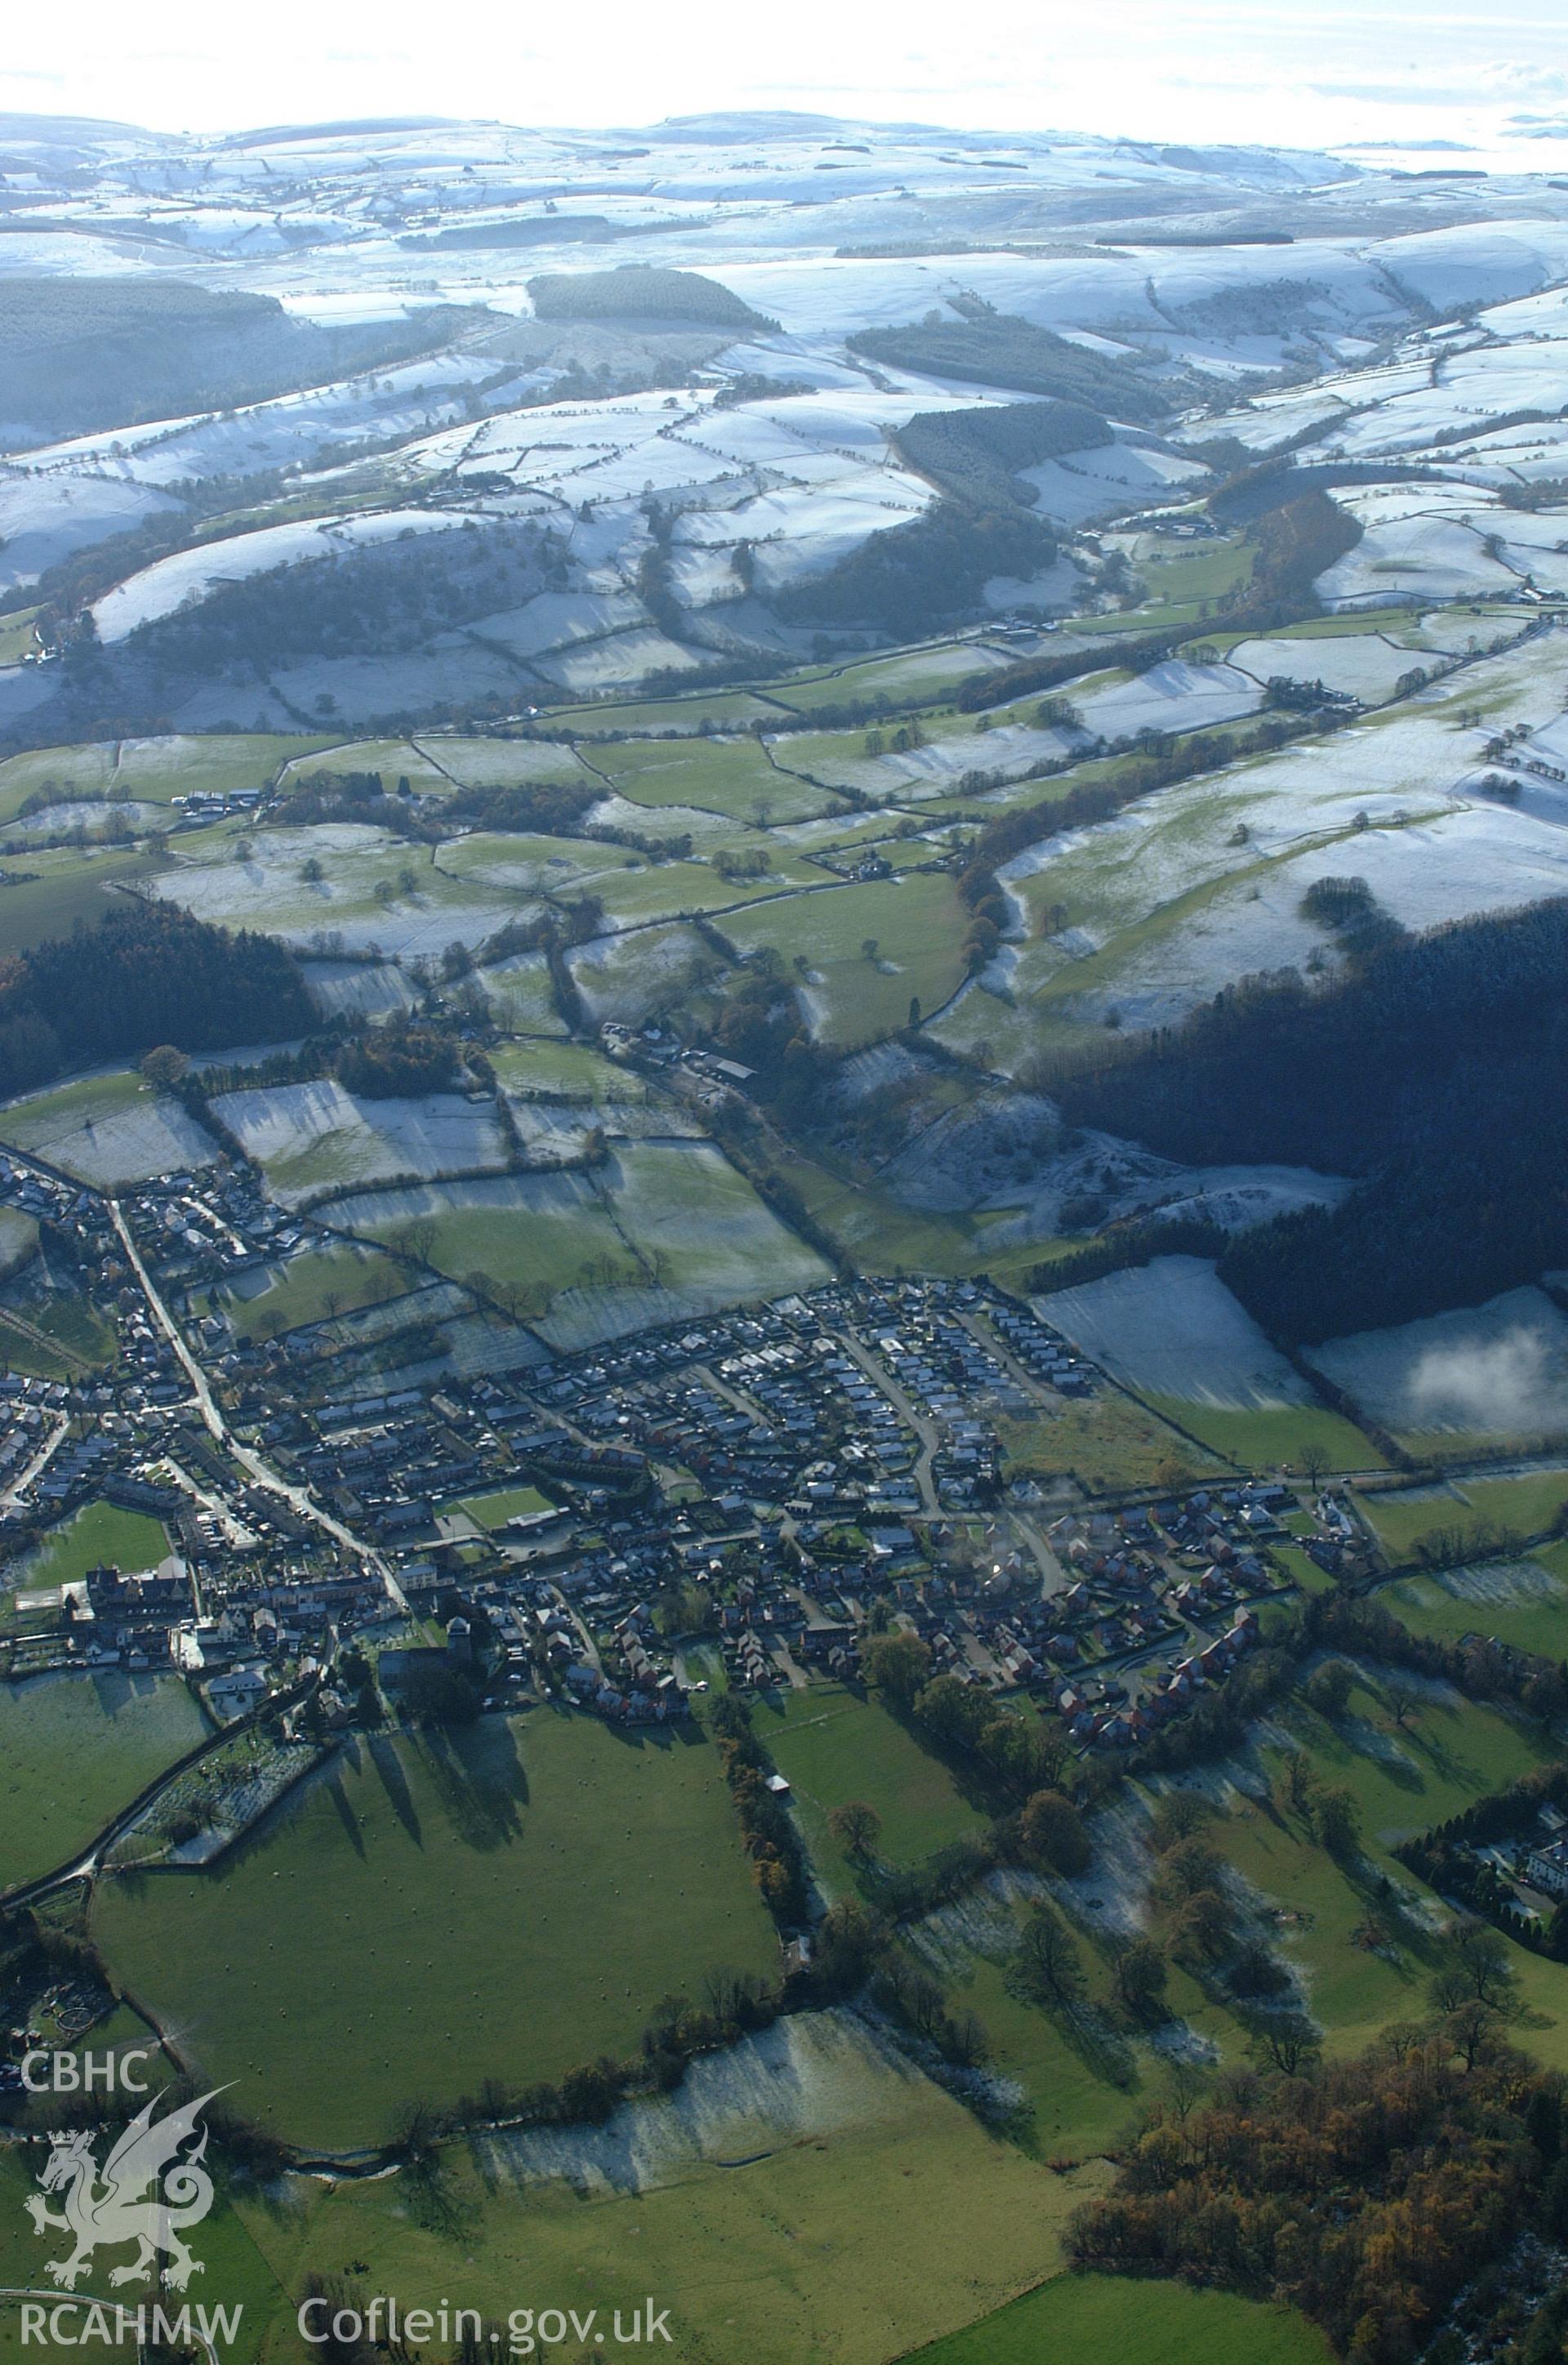 RCAHMW colour oblique aerial photograph of Moat Castle, Kerry and village in winter view from the north. Taken on 19 November 2004 by Toby Driver